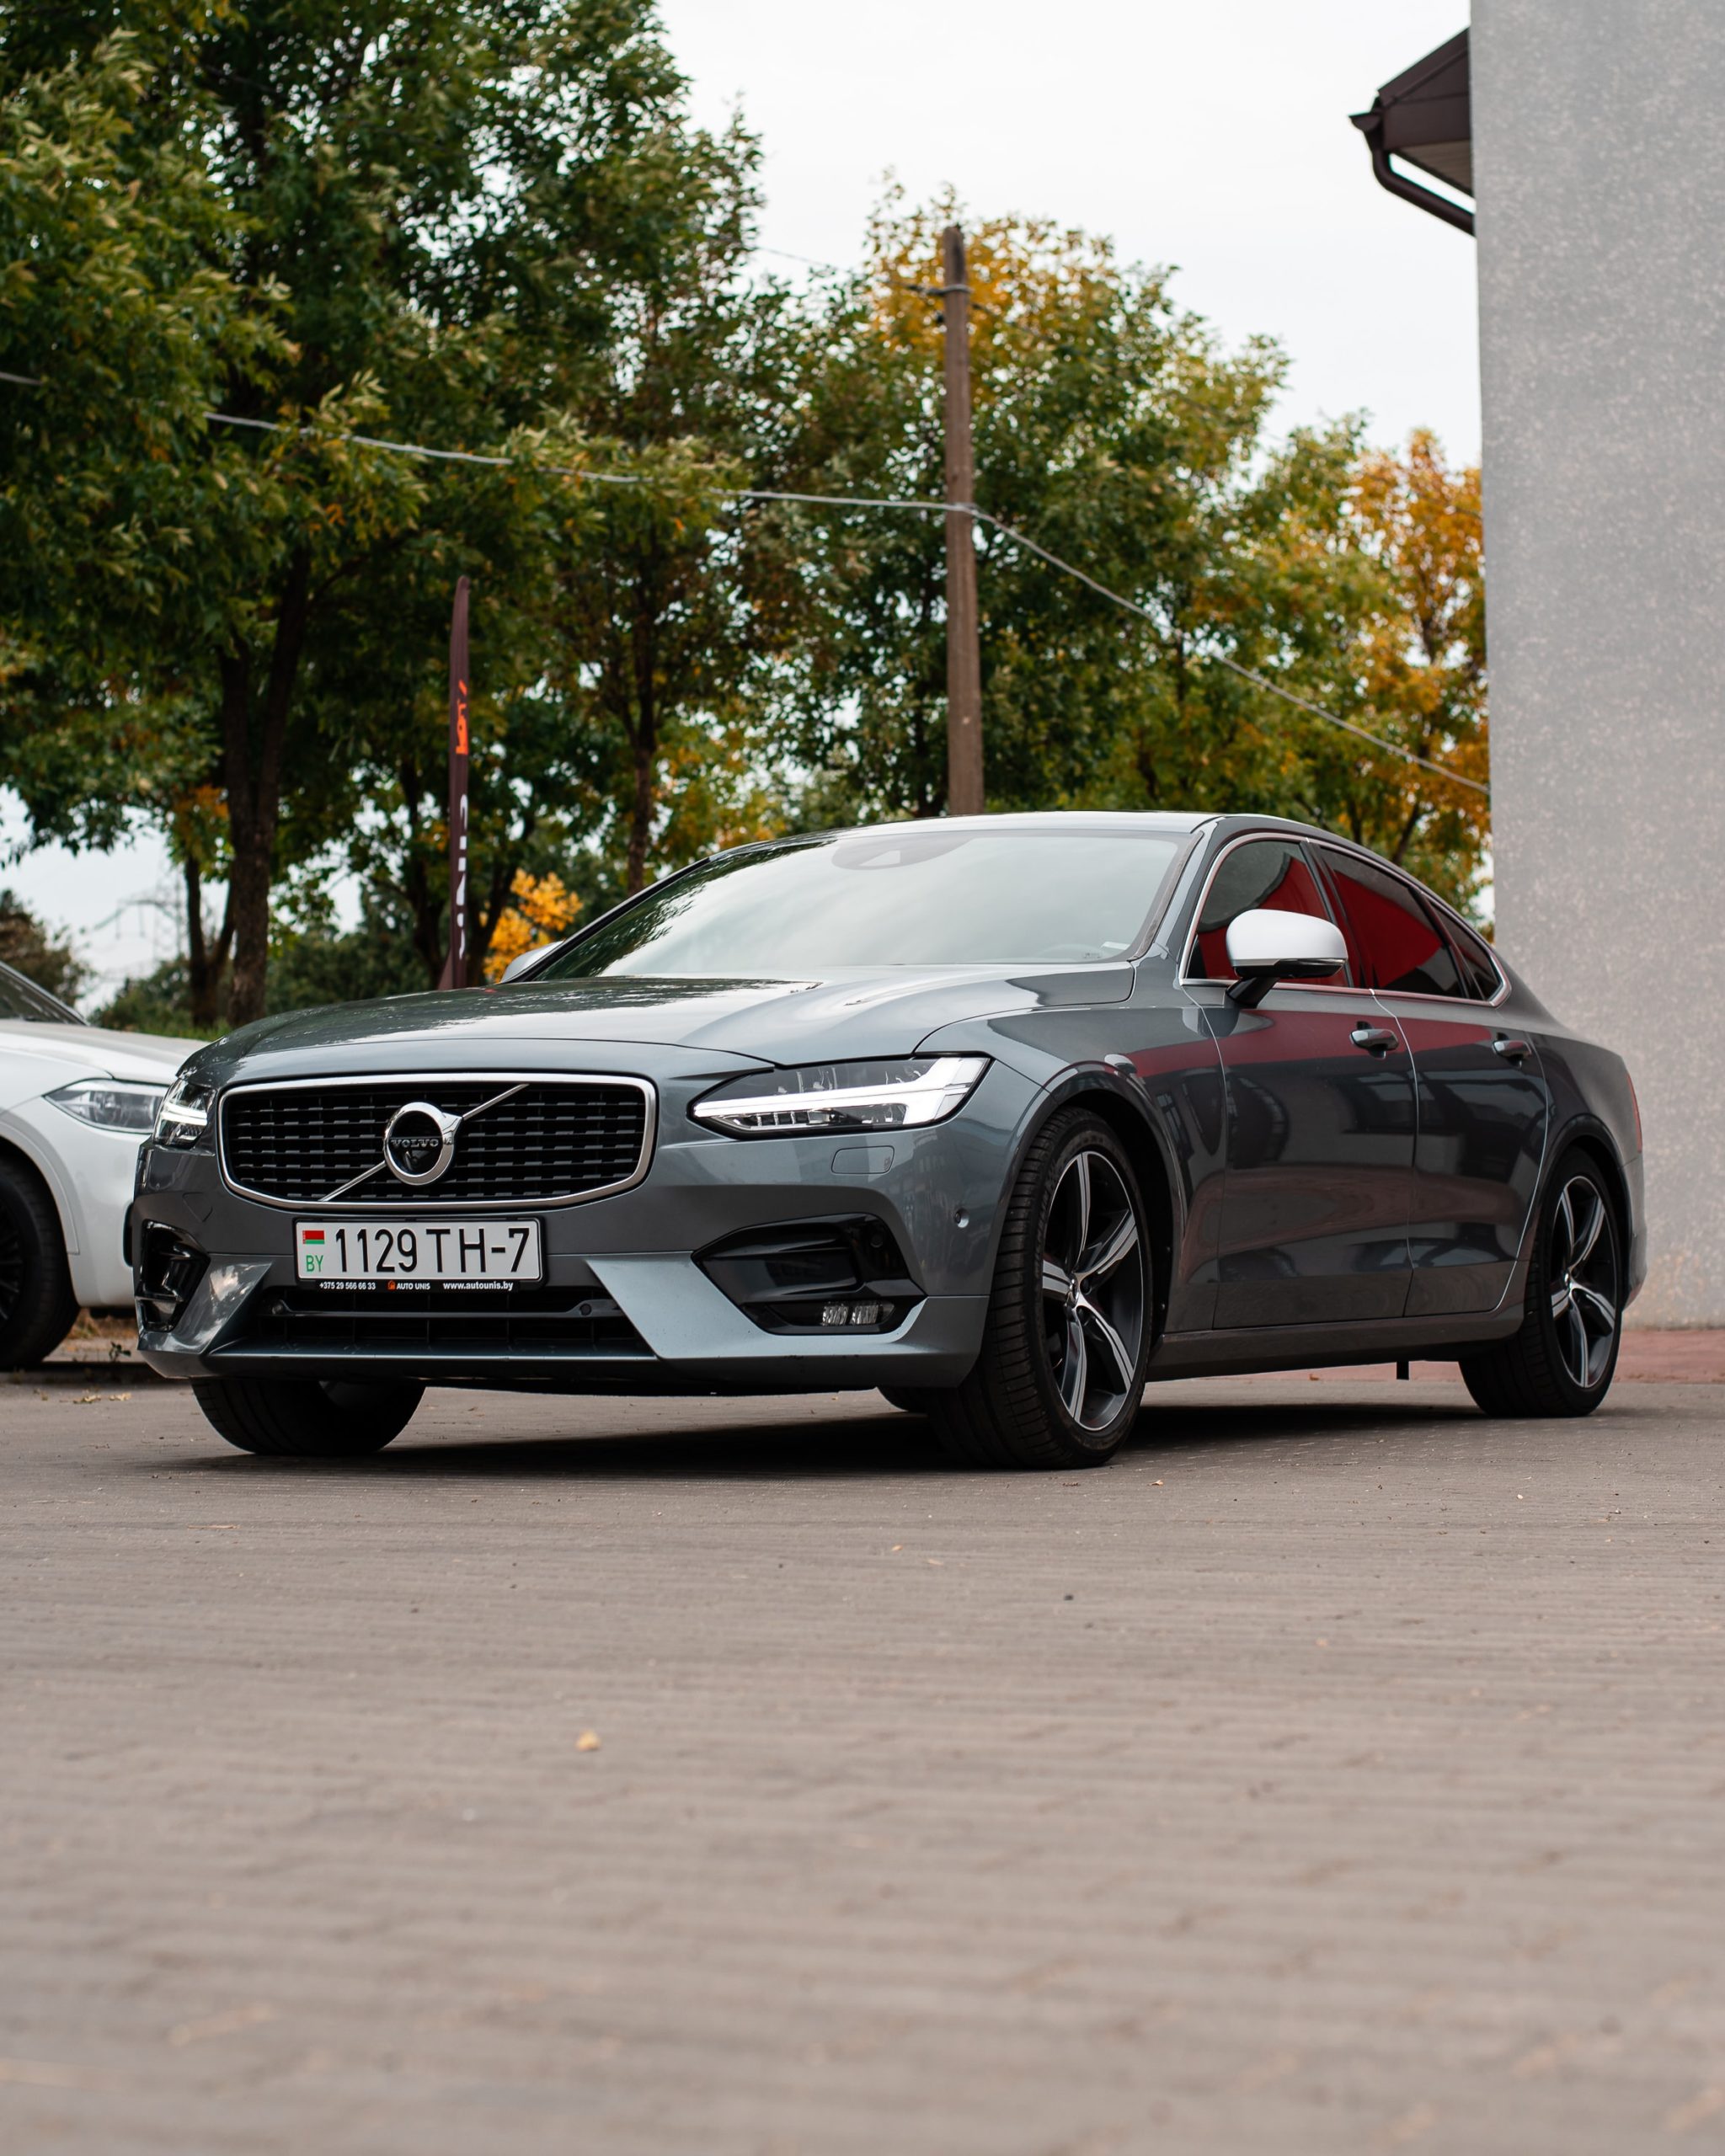 Volvo does not endorse reconditioning Volvo wheels